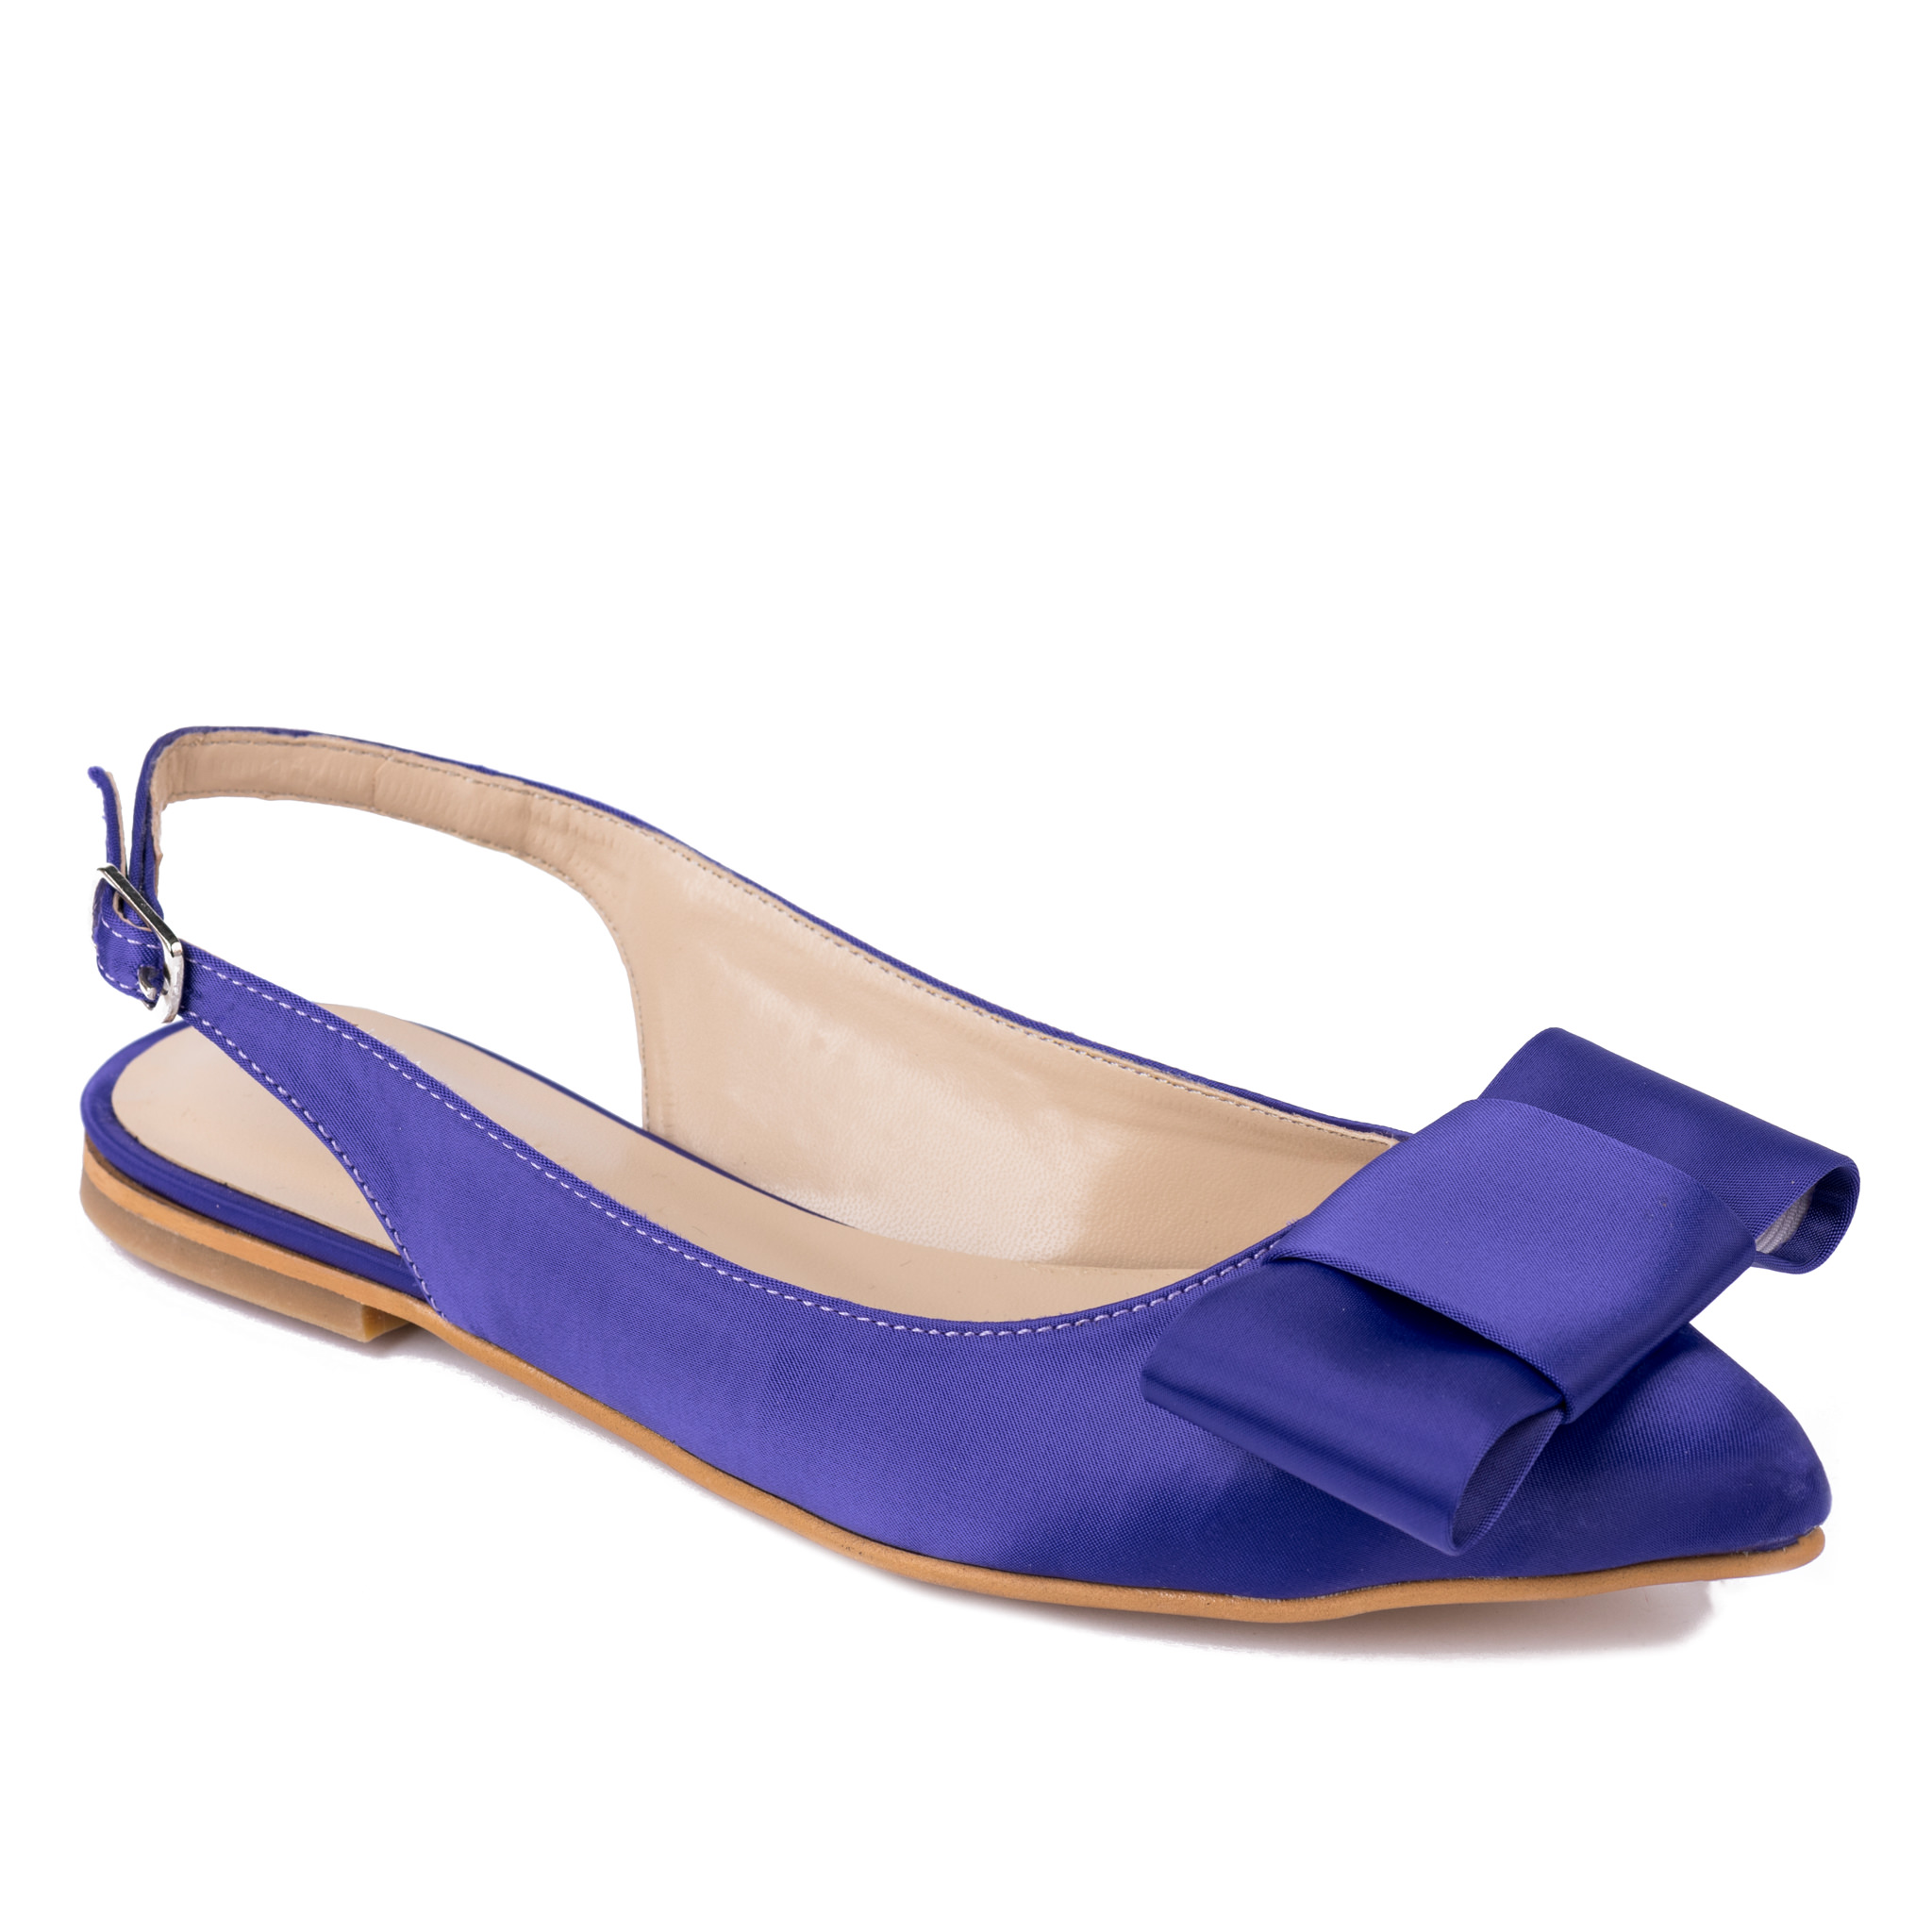 SATEN SANDALS WITH BOW - PURPLE